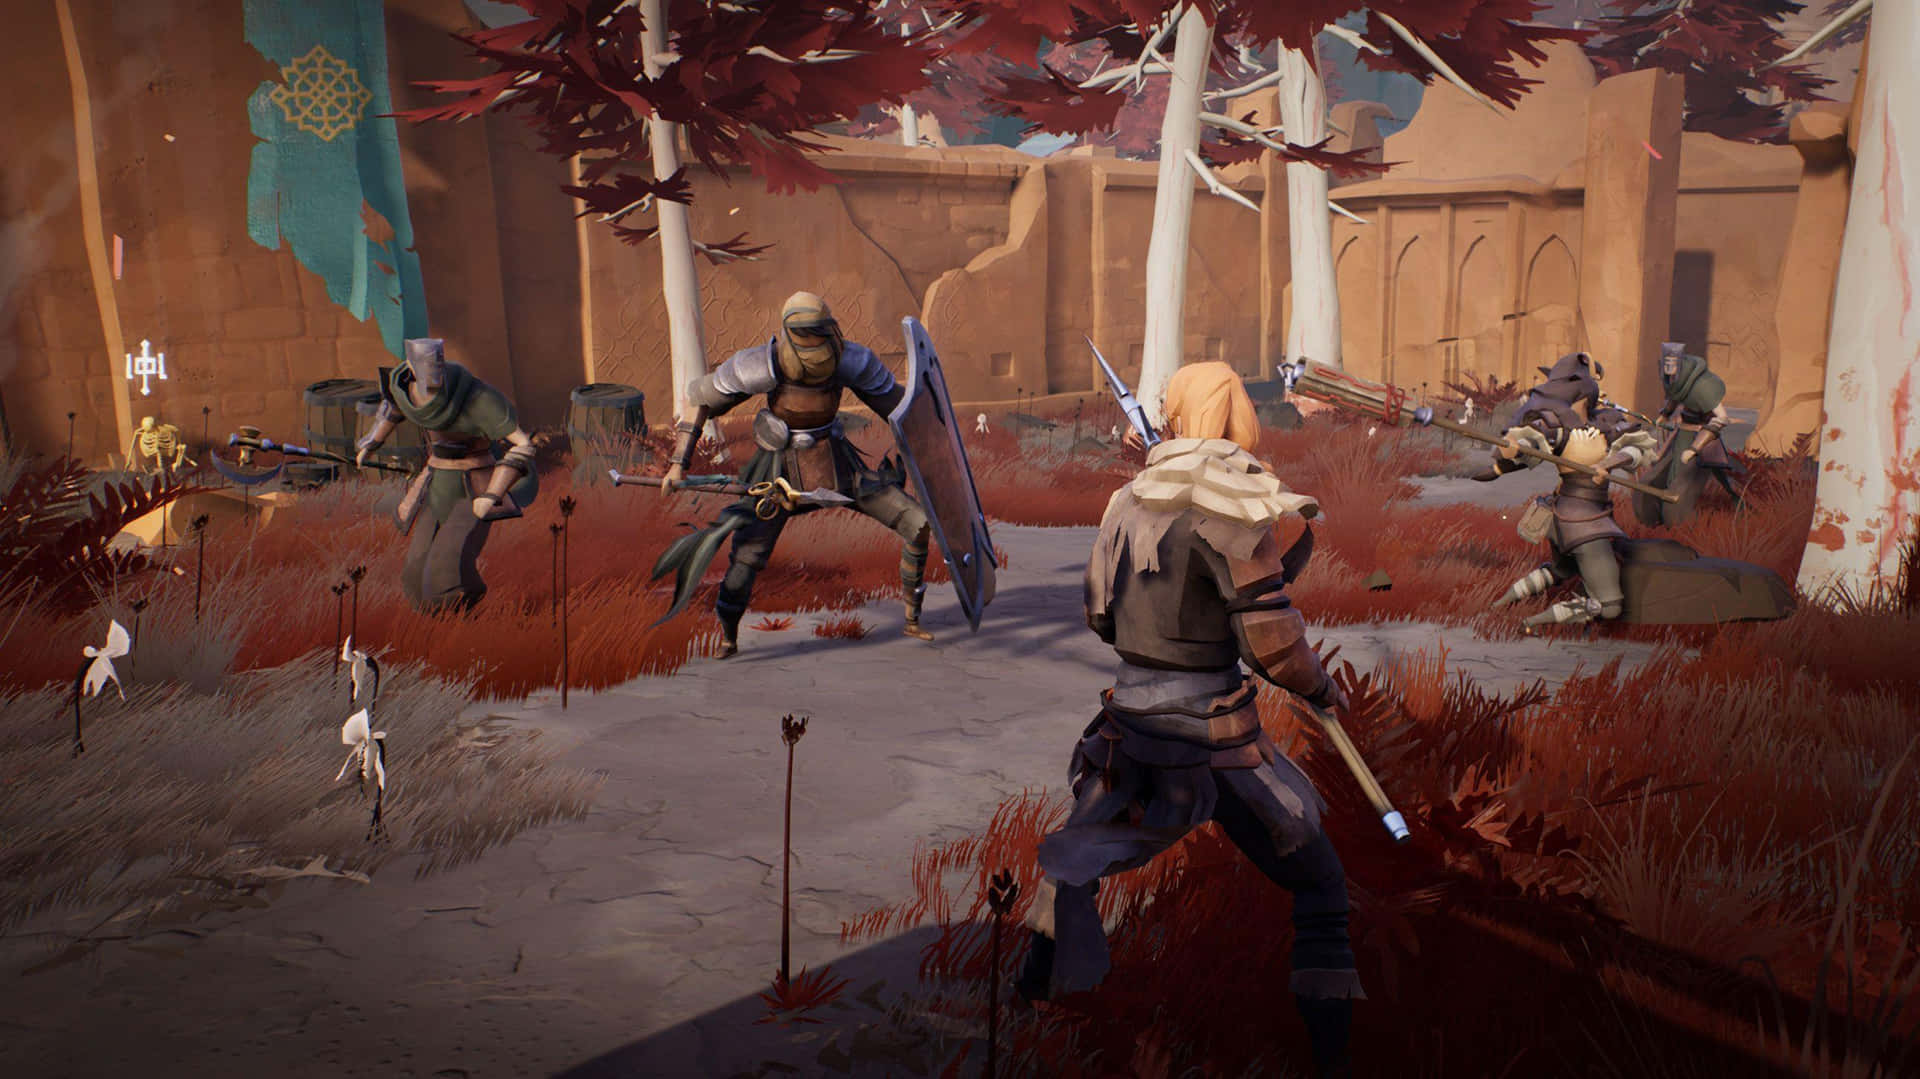 The battle continues in Ashen, an action game of adventure and discovery Wallpaper